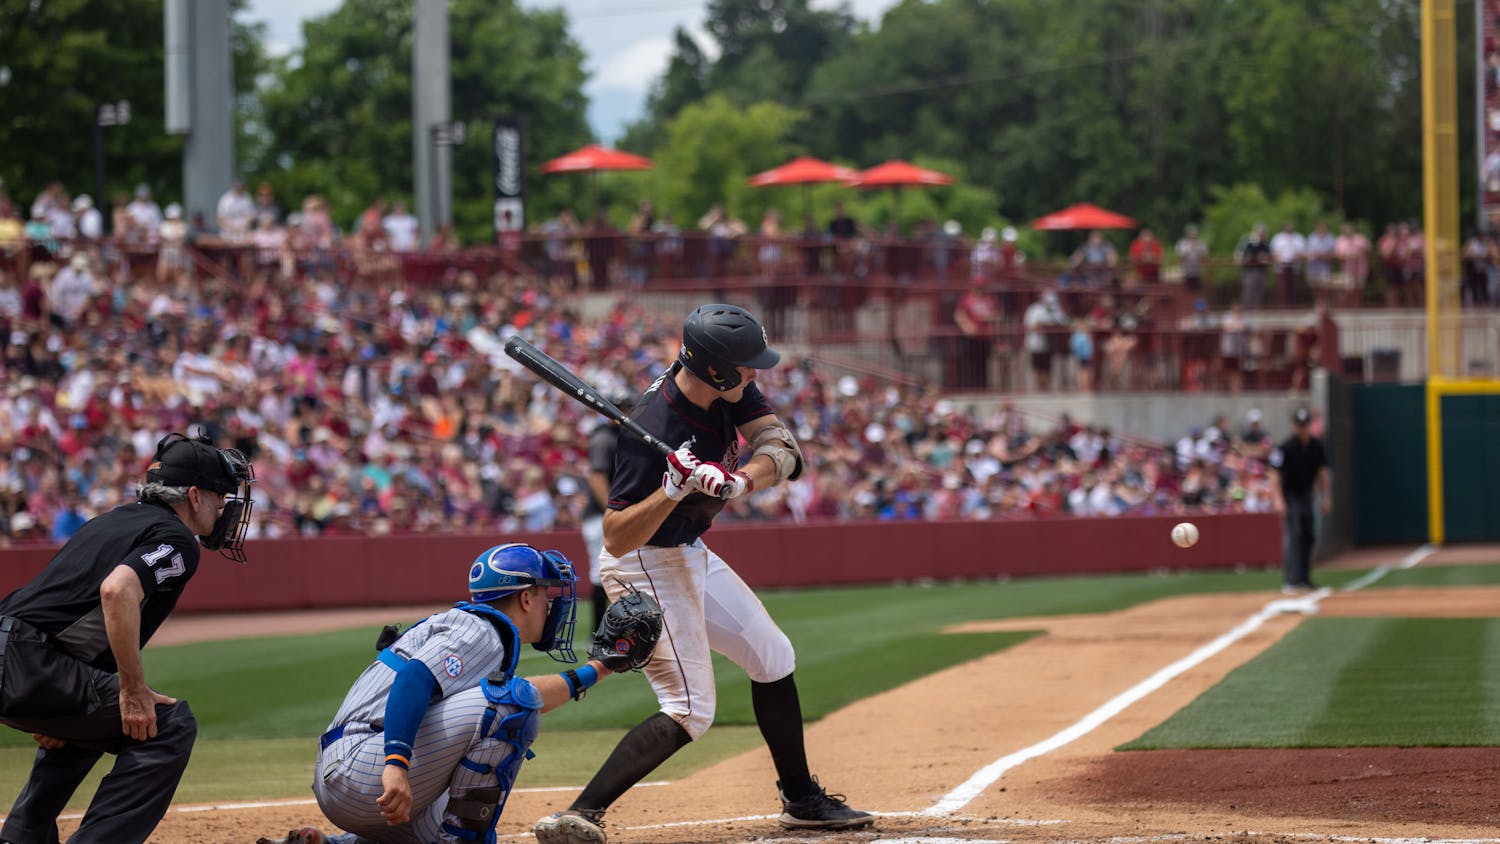 Freshman outfielder Ethan Petry prepares to swing at a pitch against Florida at Founders Park on April 22, 2023. The Gamecocks swept the Gators, winning the final game 7-5.